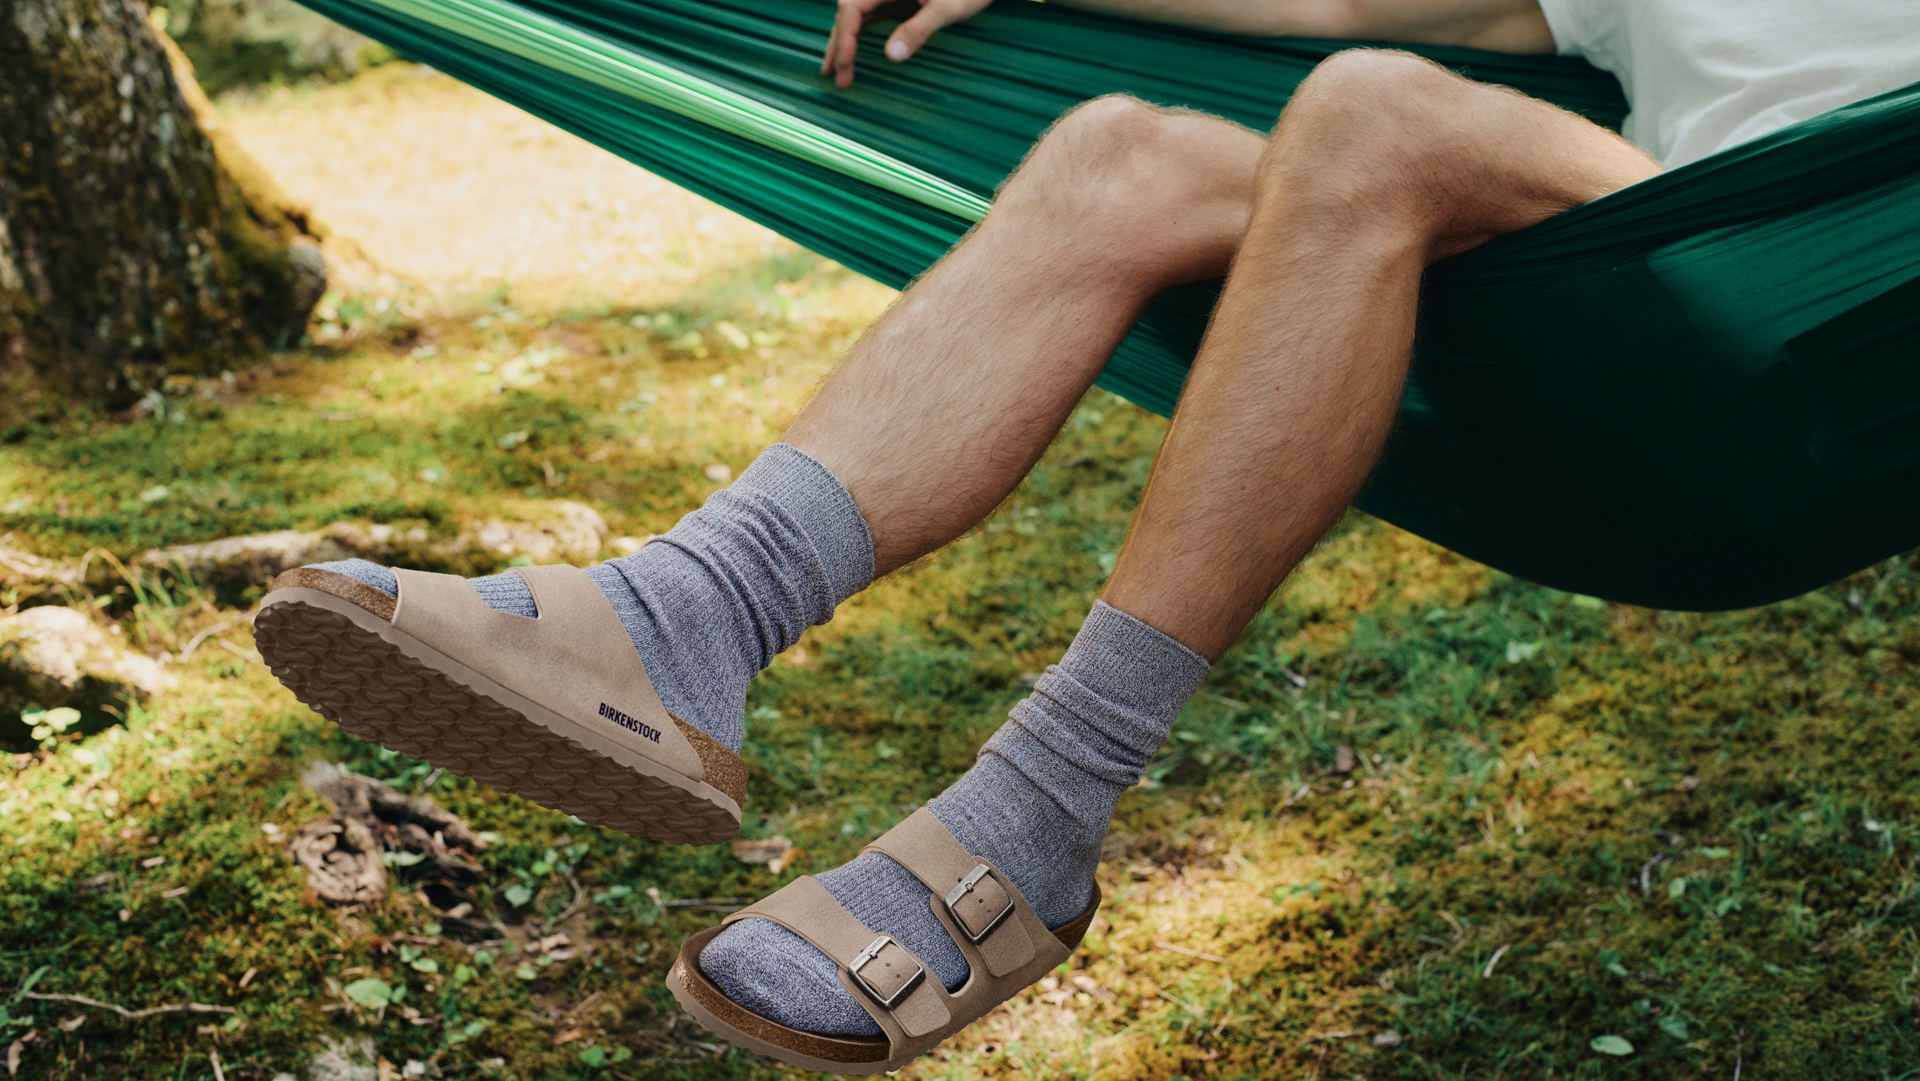 WAITING FOR THE SALE AT BIRKENSTOCK?